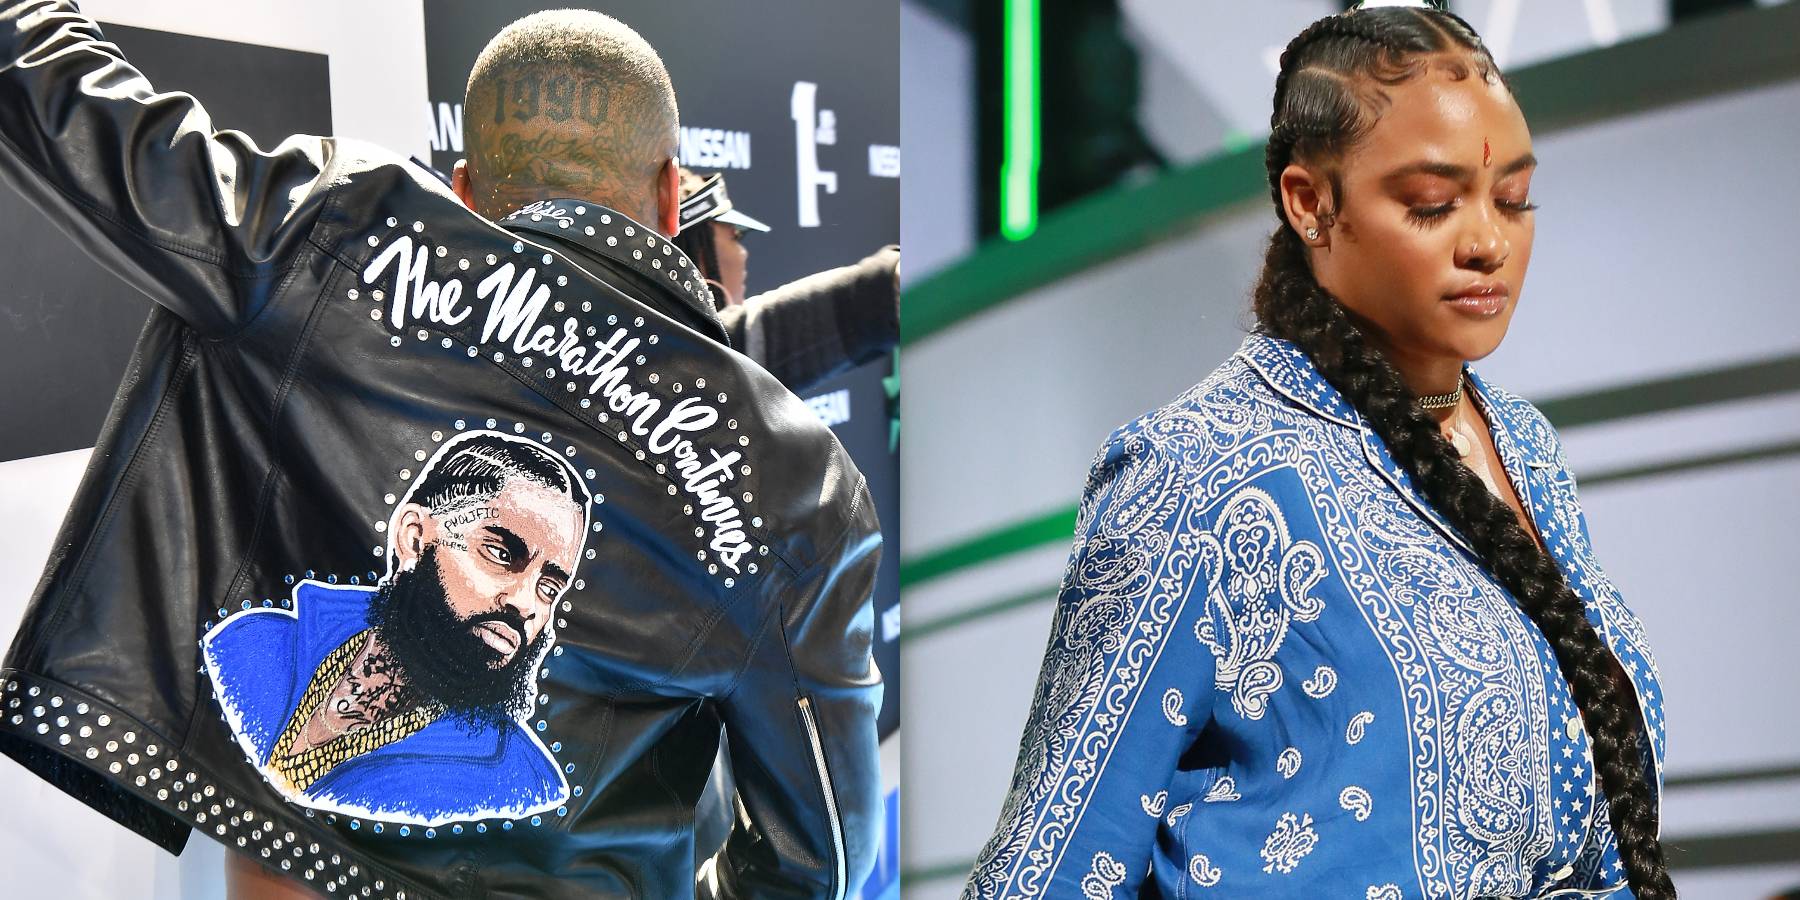 YG And Nipsey Hussle's Sister, Samantha Smith, Wore Nipsey Tribute Outfits  At The 2019 BET Awards, News